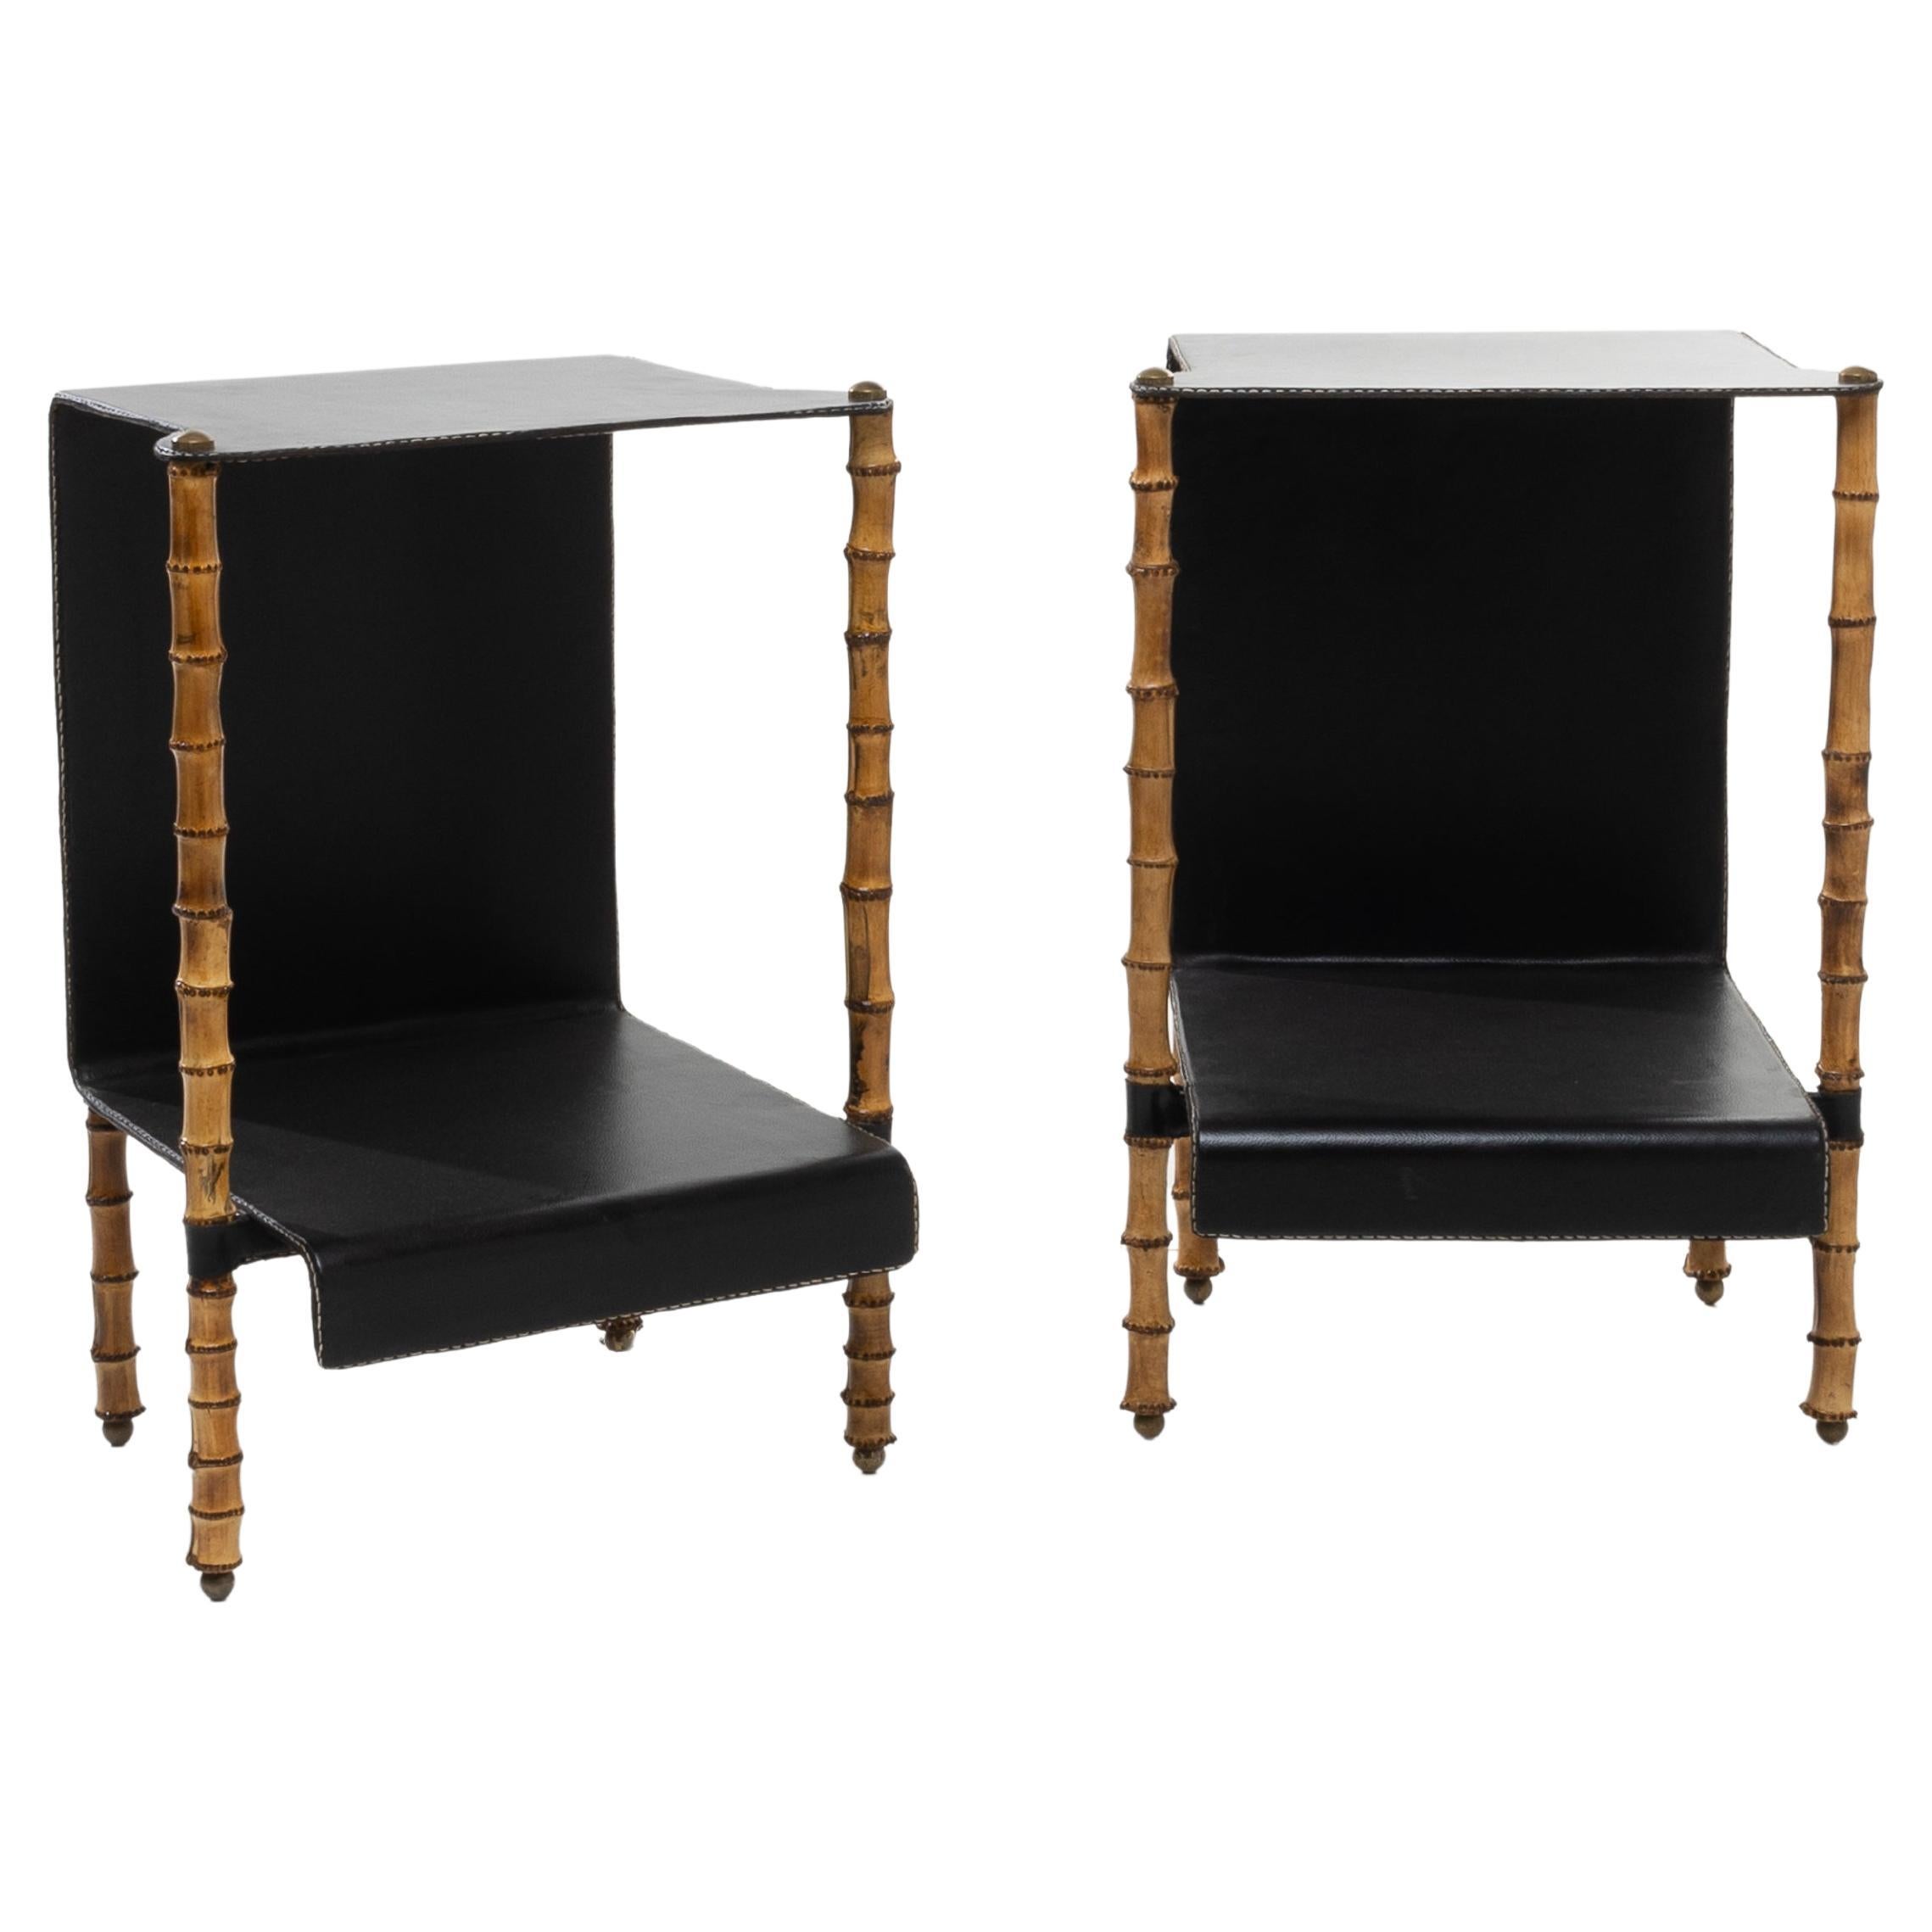 Pair of side tables by Jacques Adnet – Compagnie des Arts Fran çais